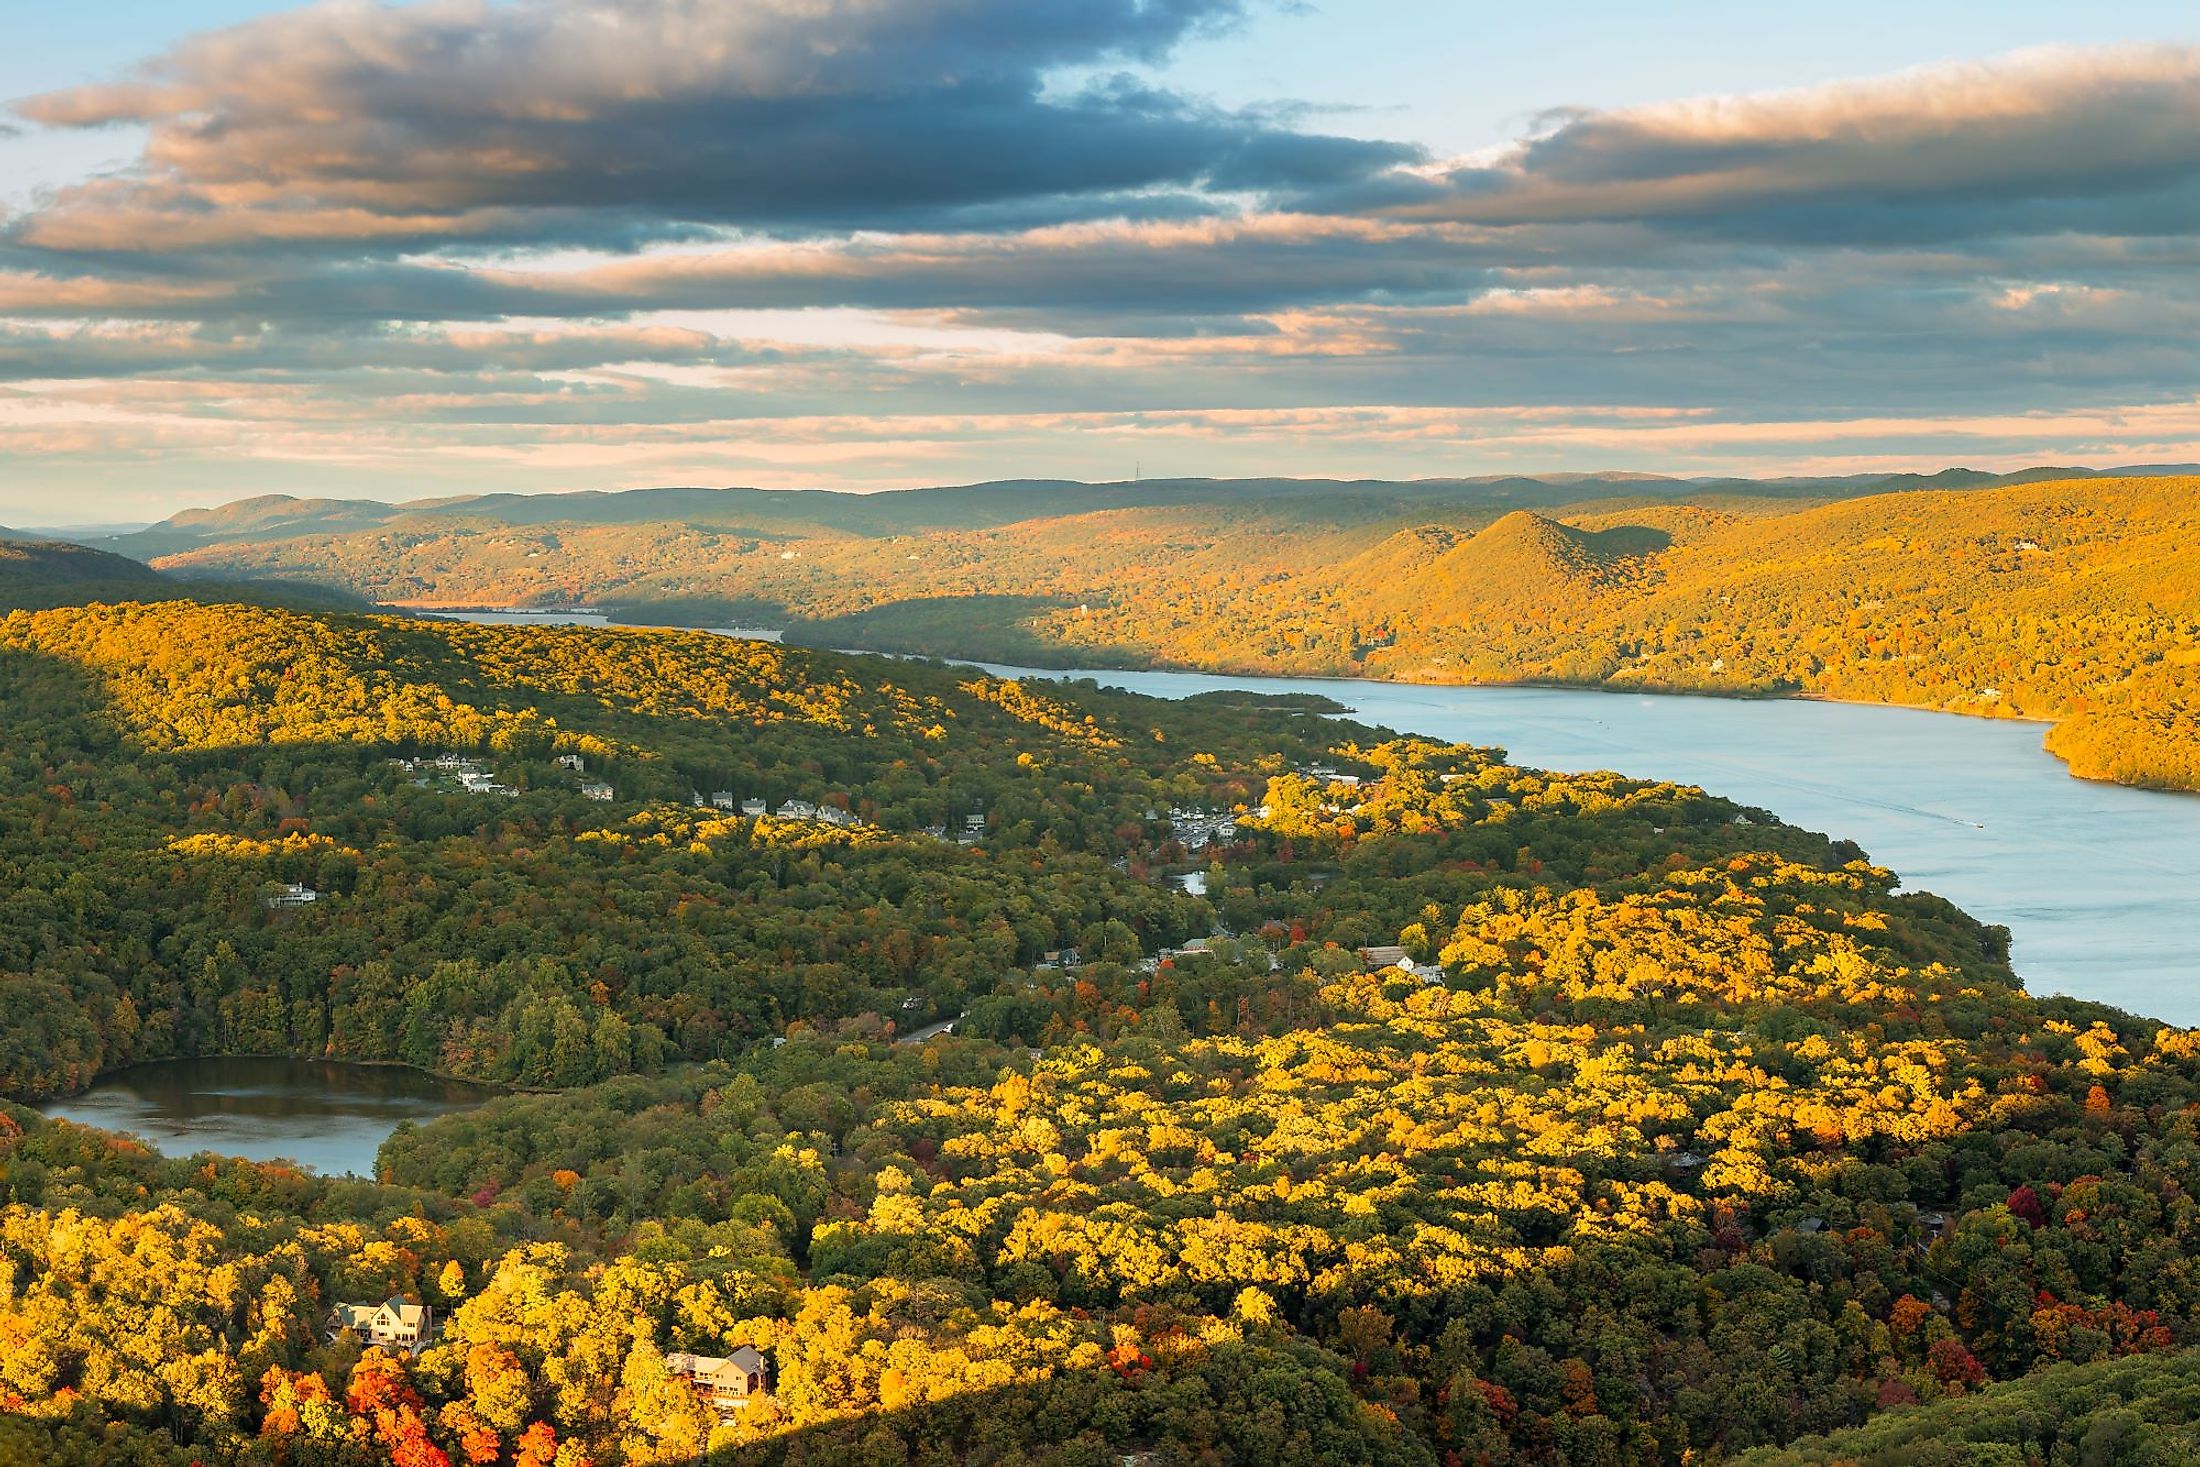 Hudson Valley and Fort Montgomery, New York, viewed from Bear Mountain on a sunny autumn afternoon.